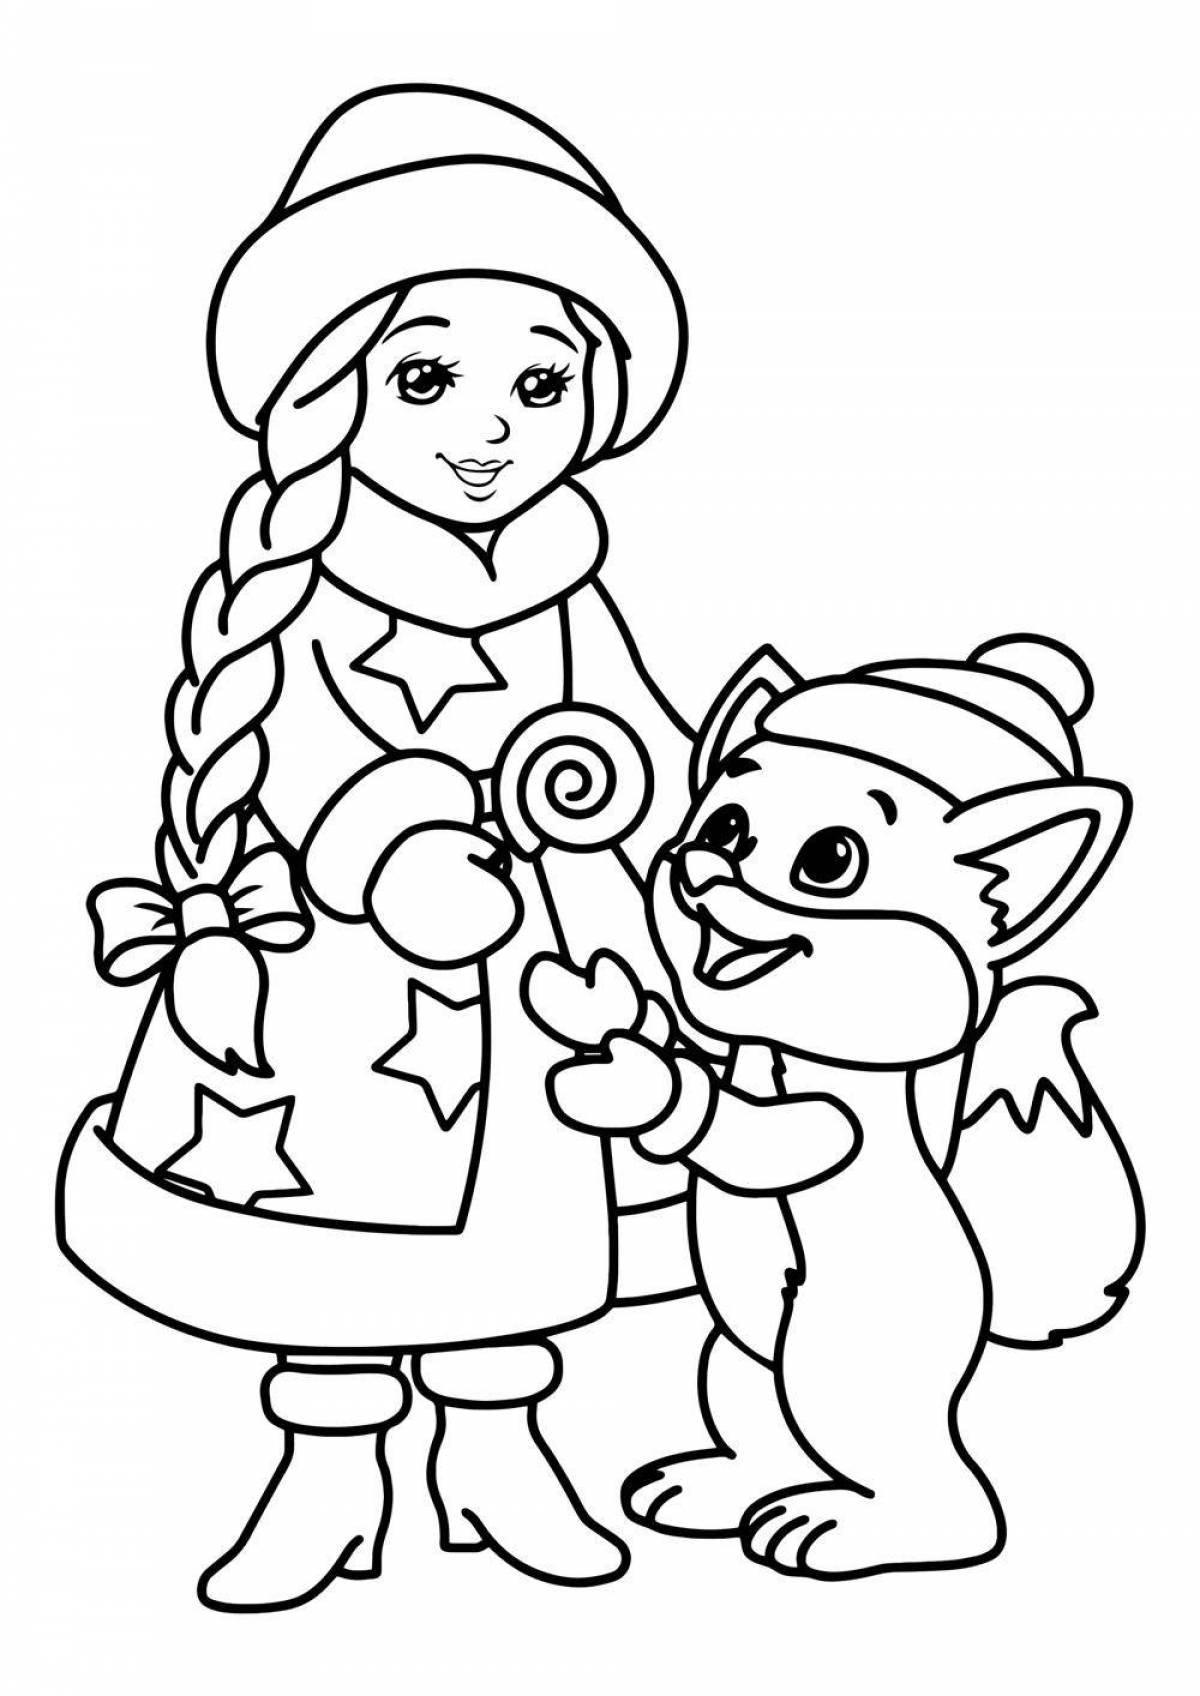 Gorgeous fox Christmas coloring book